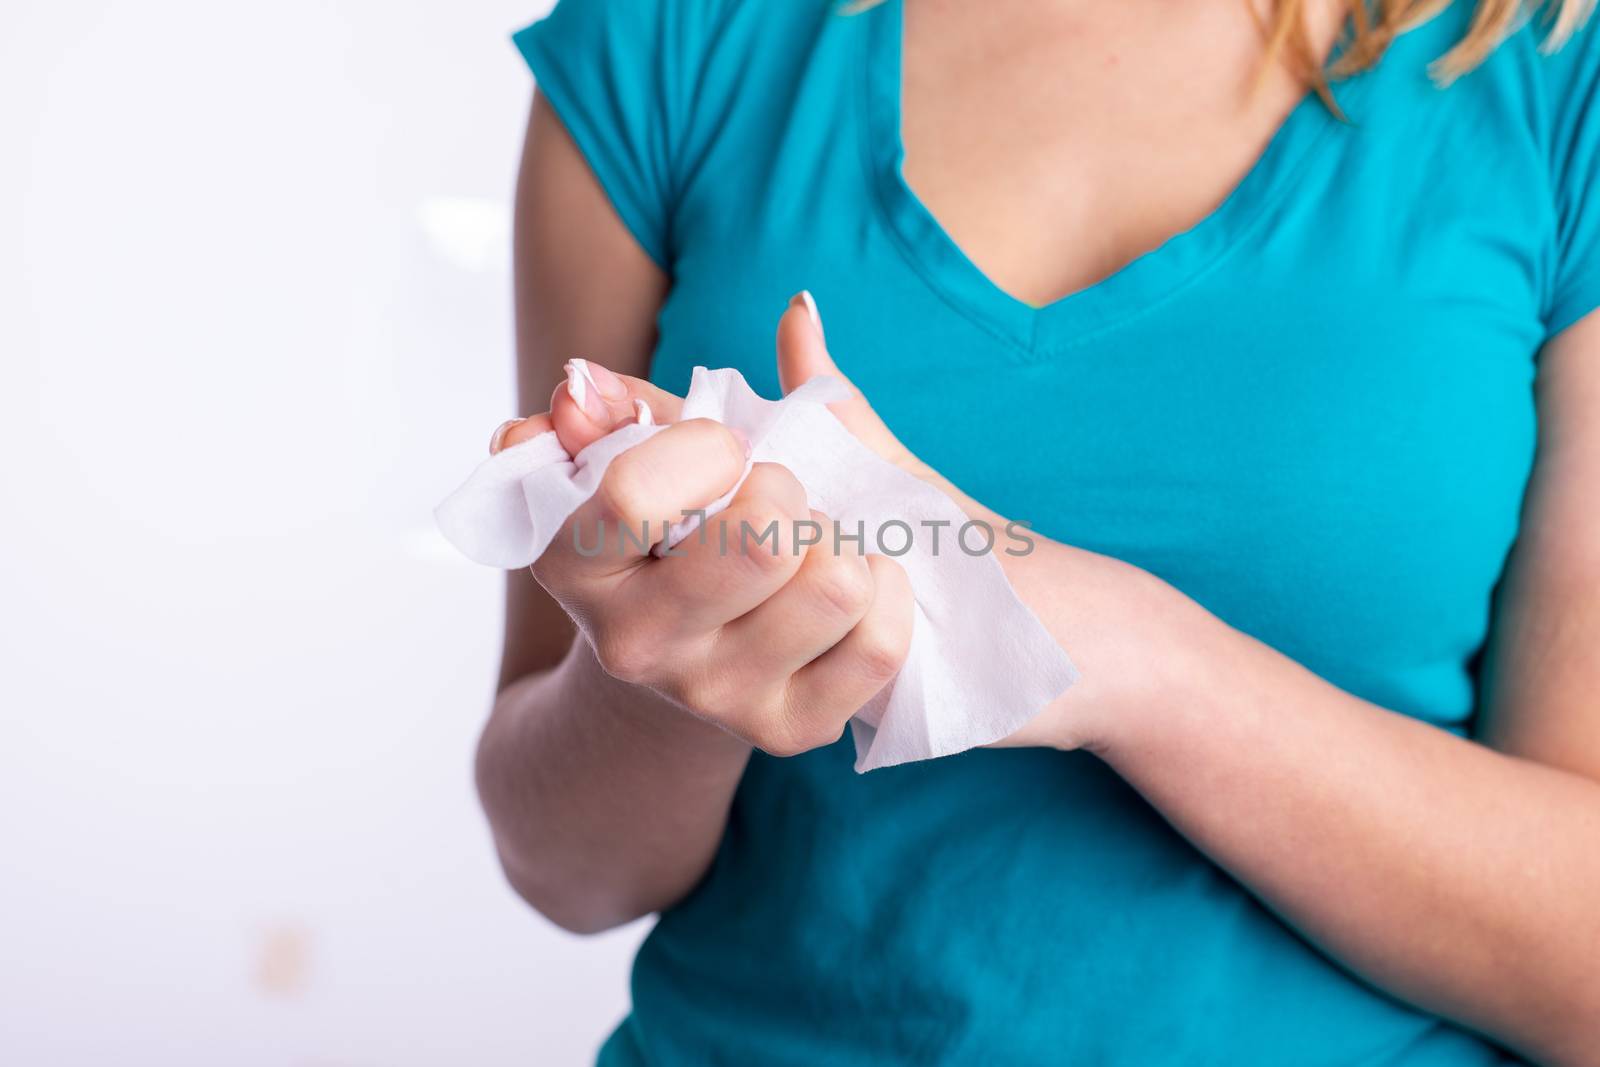 Prevention of infectious diseases - Cleaning hands with wet wipe by adamr